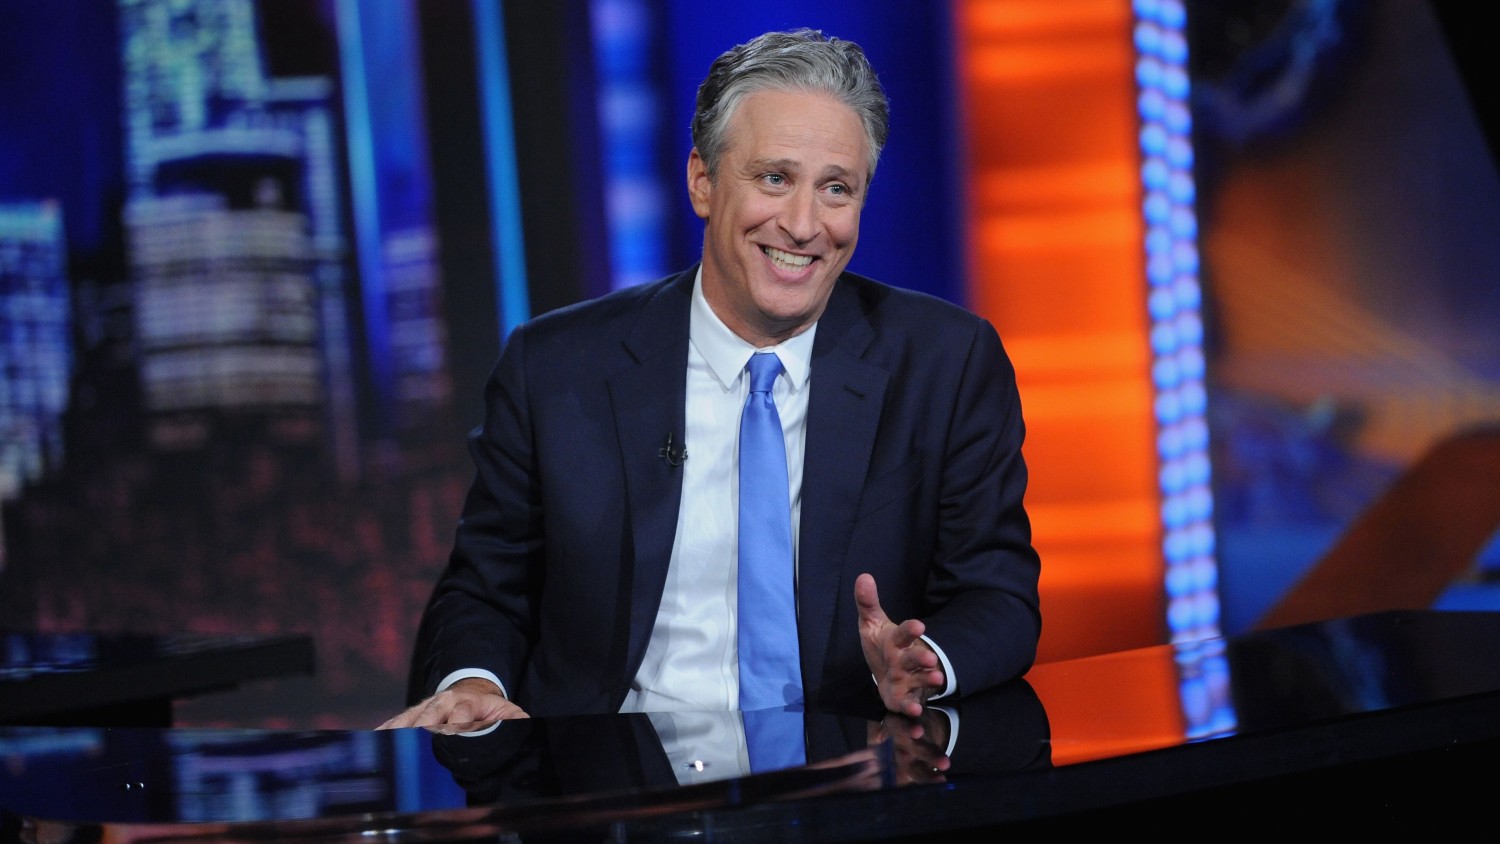 Jon Stewart to return to ‘The Daily Show’ as a host and executive producer